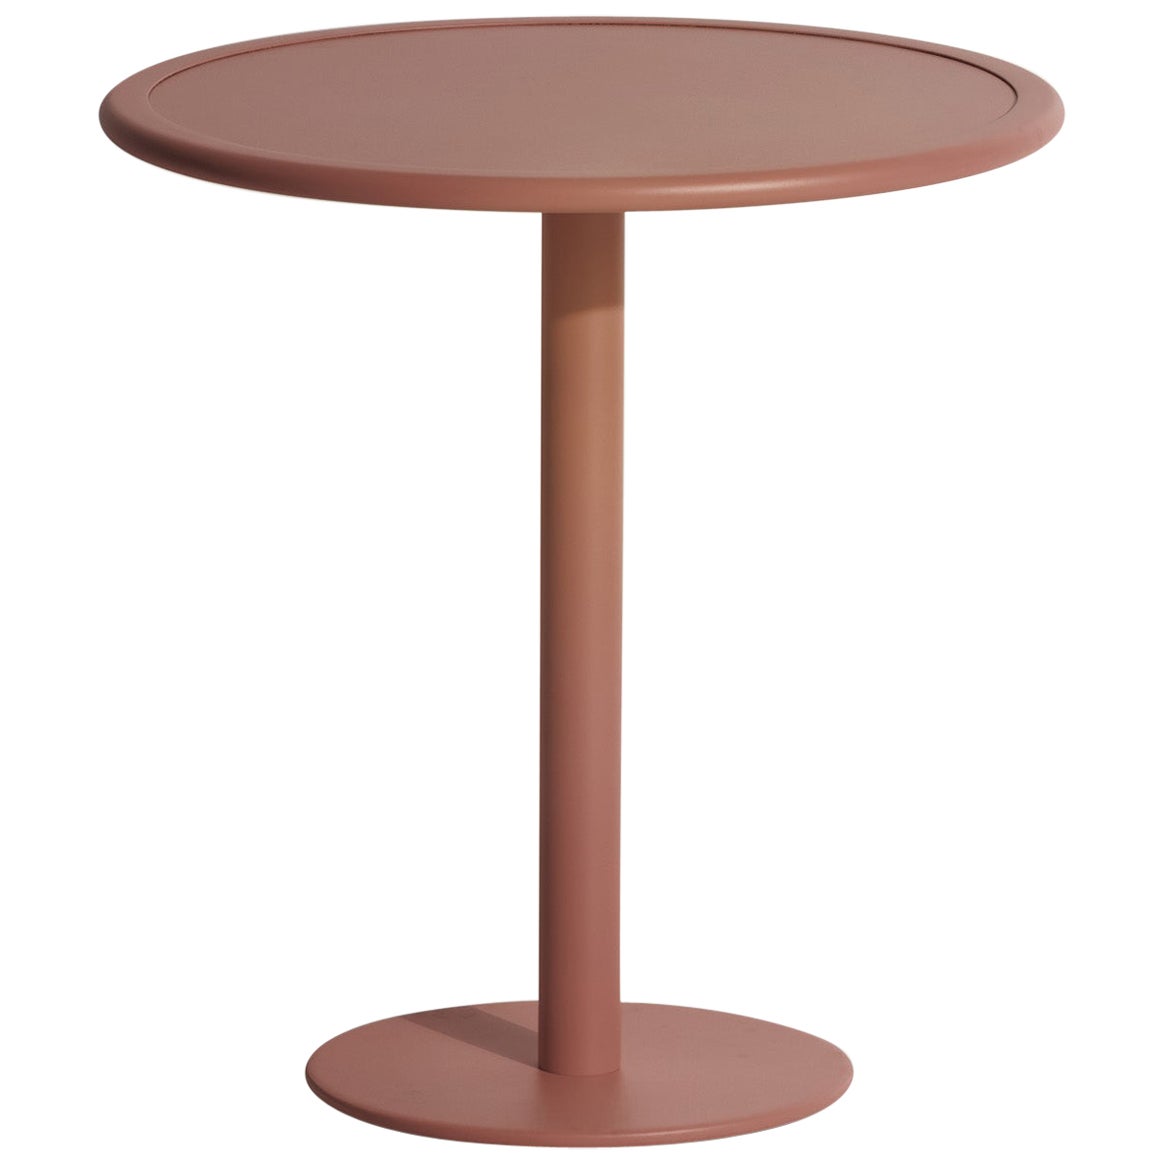 Petite Friture Week-End Bistro Round Dining Table in Terracotta Aluminium, 2017 For Sale